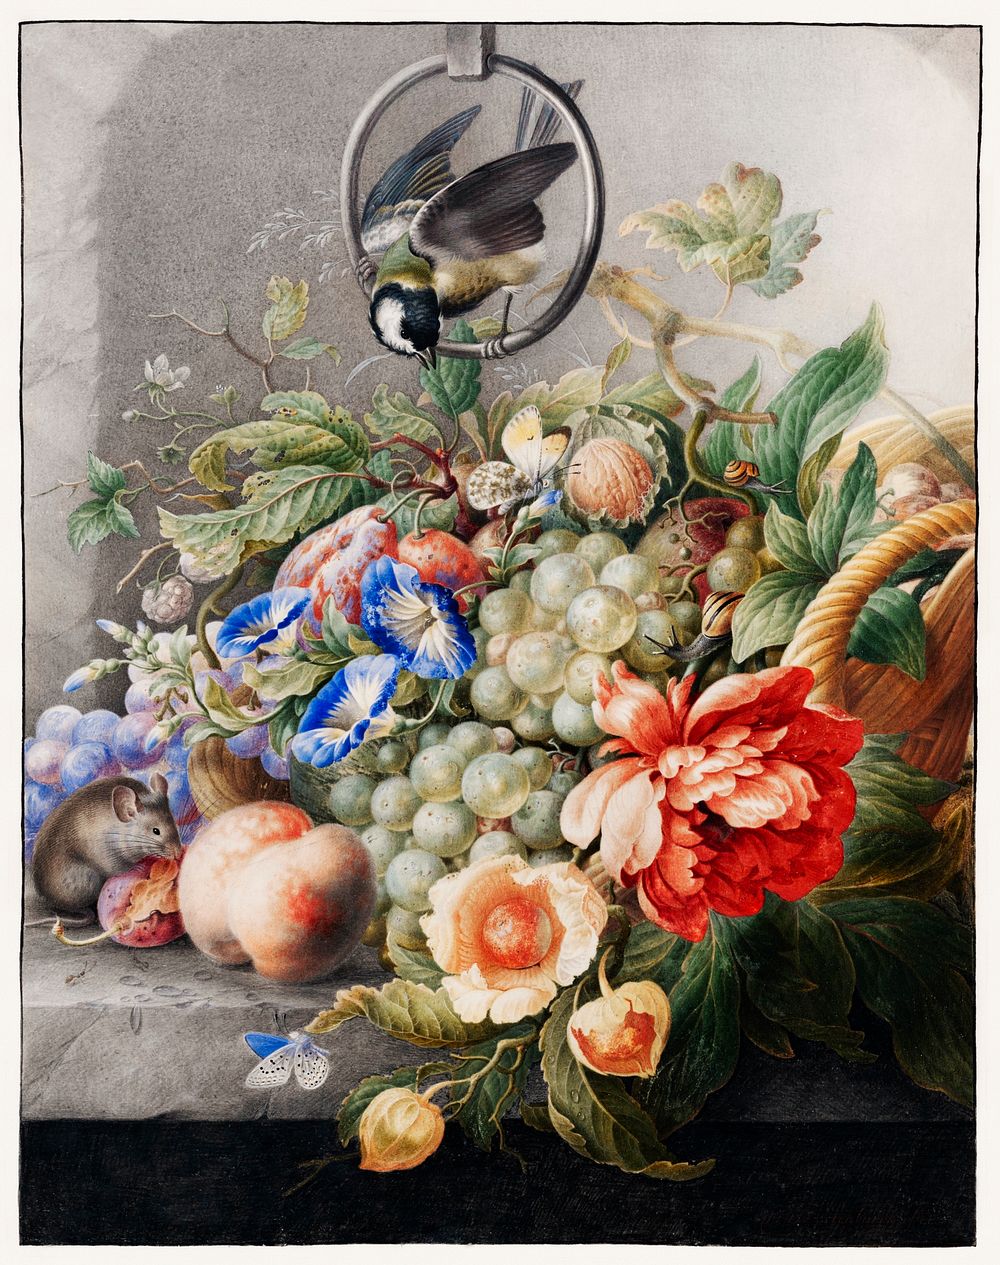 Flowers and fruits by Herman Henstenburgh (c.1700-c.1710). Original from The Rijksmuseum. Digitally enhanced by rawpixel.